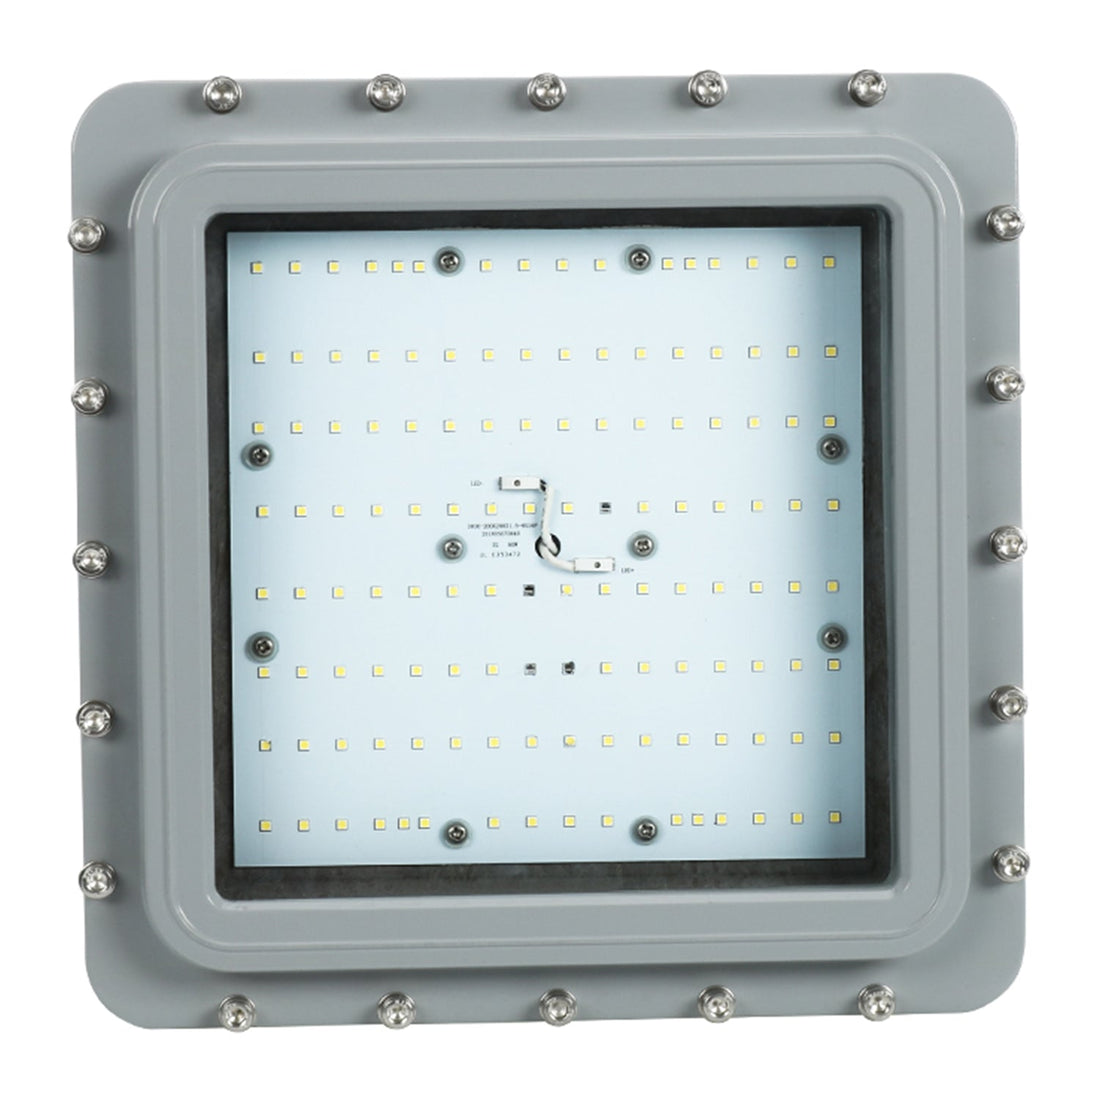 D Series 100W Non-Dimmable LED Explosion Proof Flood Light: Bright and Reliable Lighting Solution for Hazardous Locations with 13500LM and IP66 Protection, Ideal for Industrial Environments